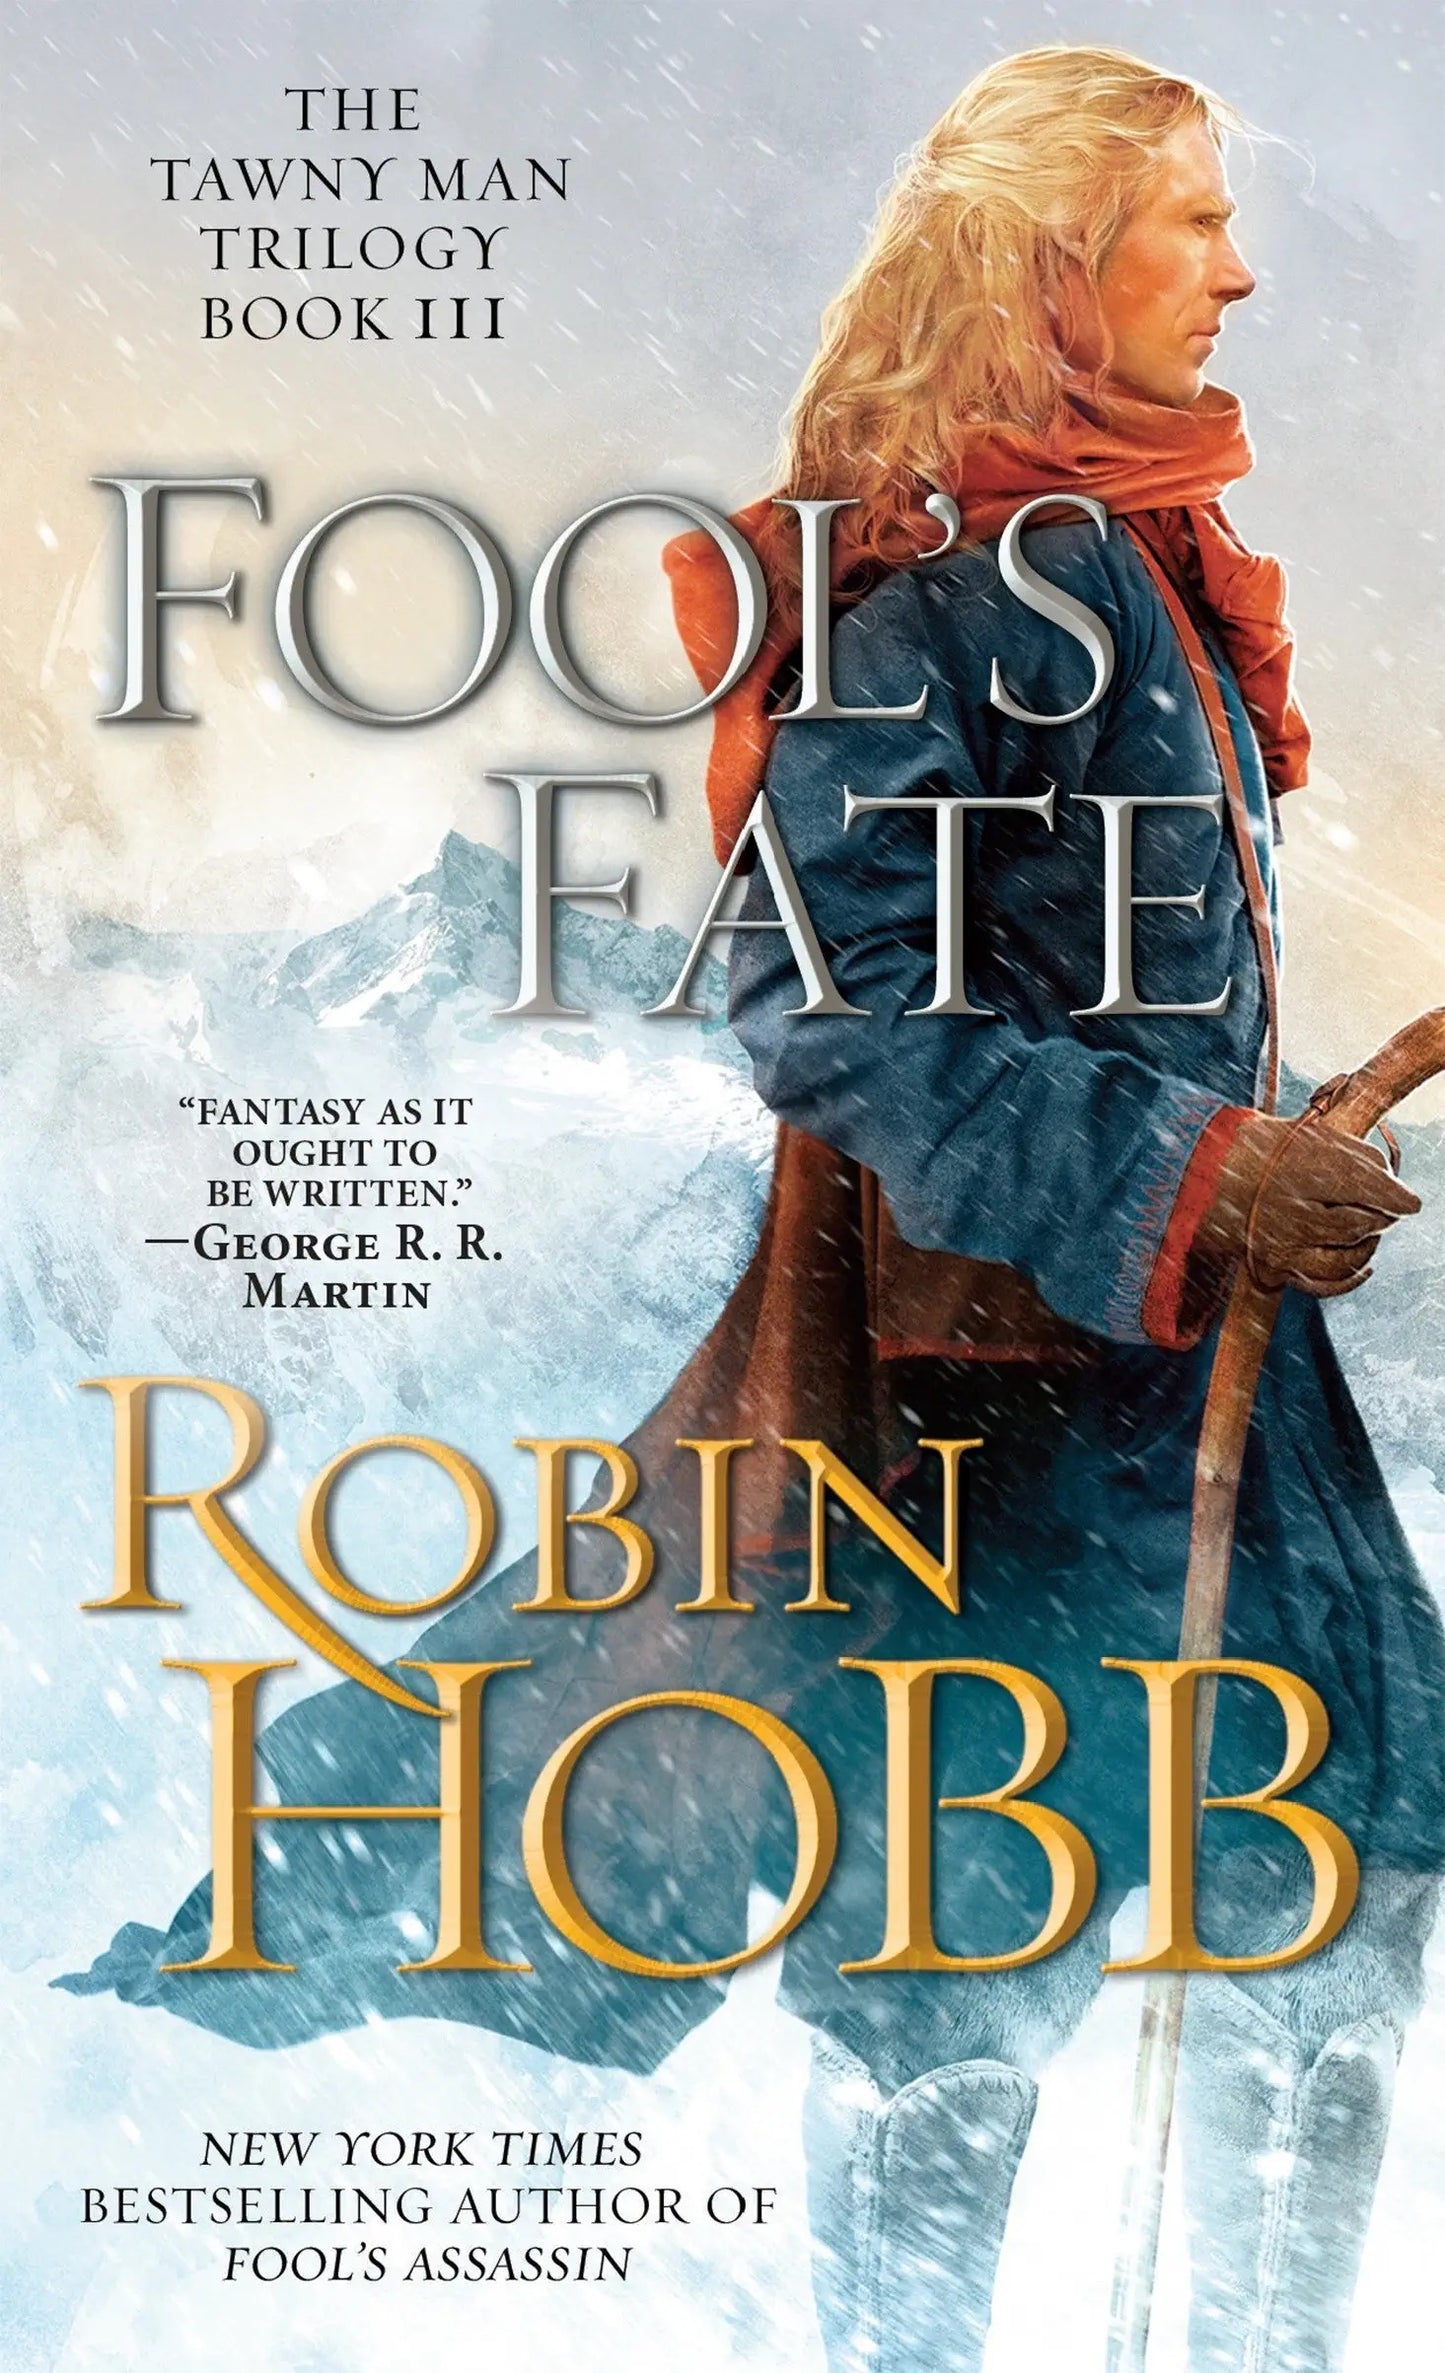 Fool's Fate (Paperback) by Robin Hobb